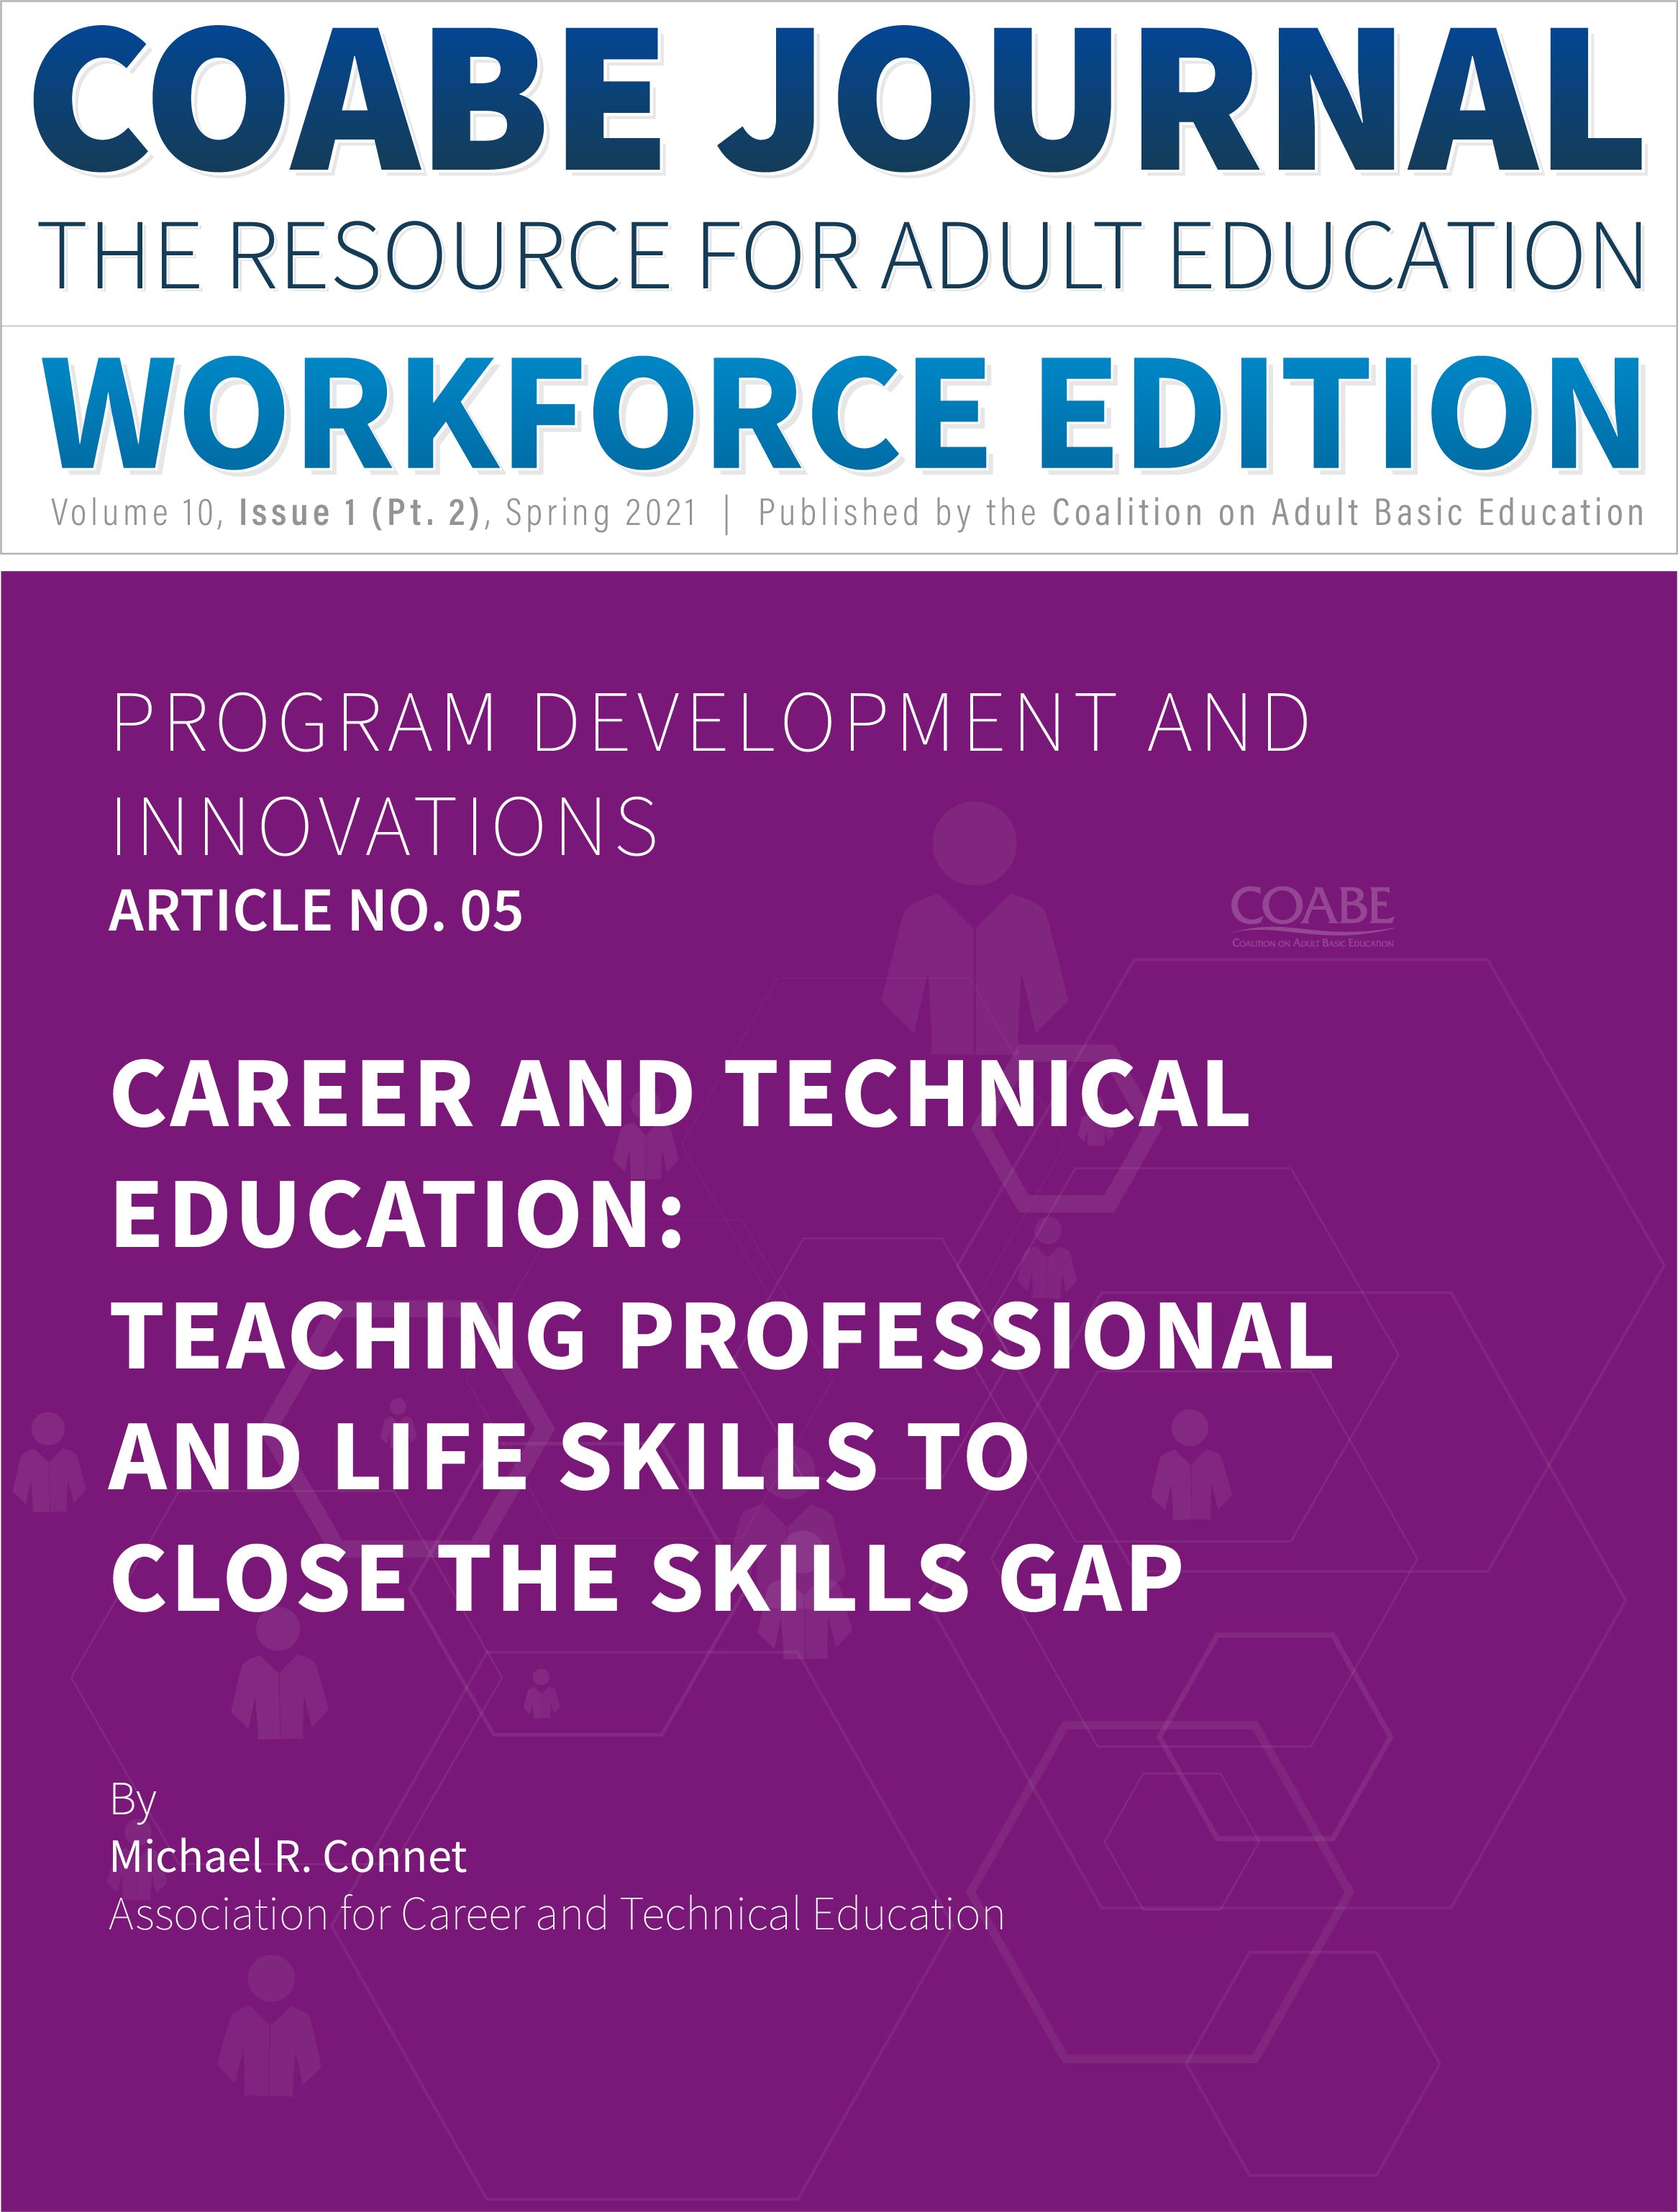 Article 05 :: Career And Technical Education: Teaching Professional And Life Skills To Close The Skills Gap